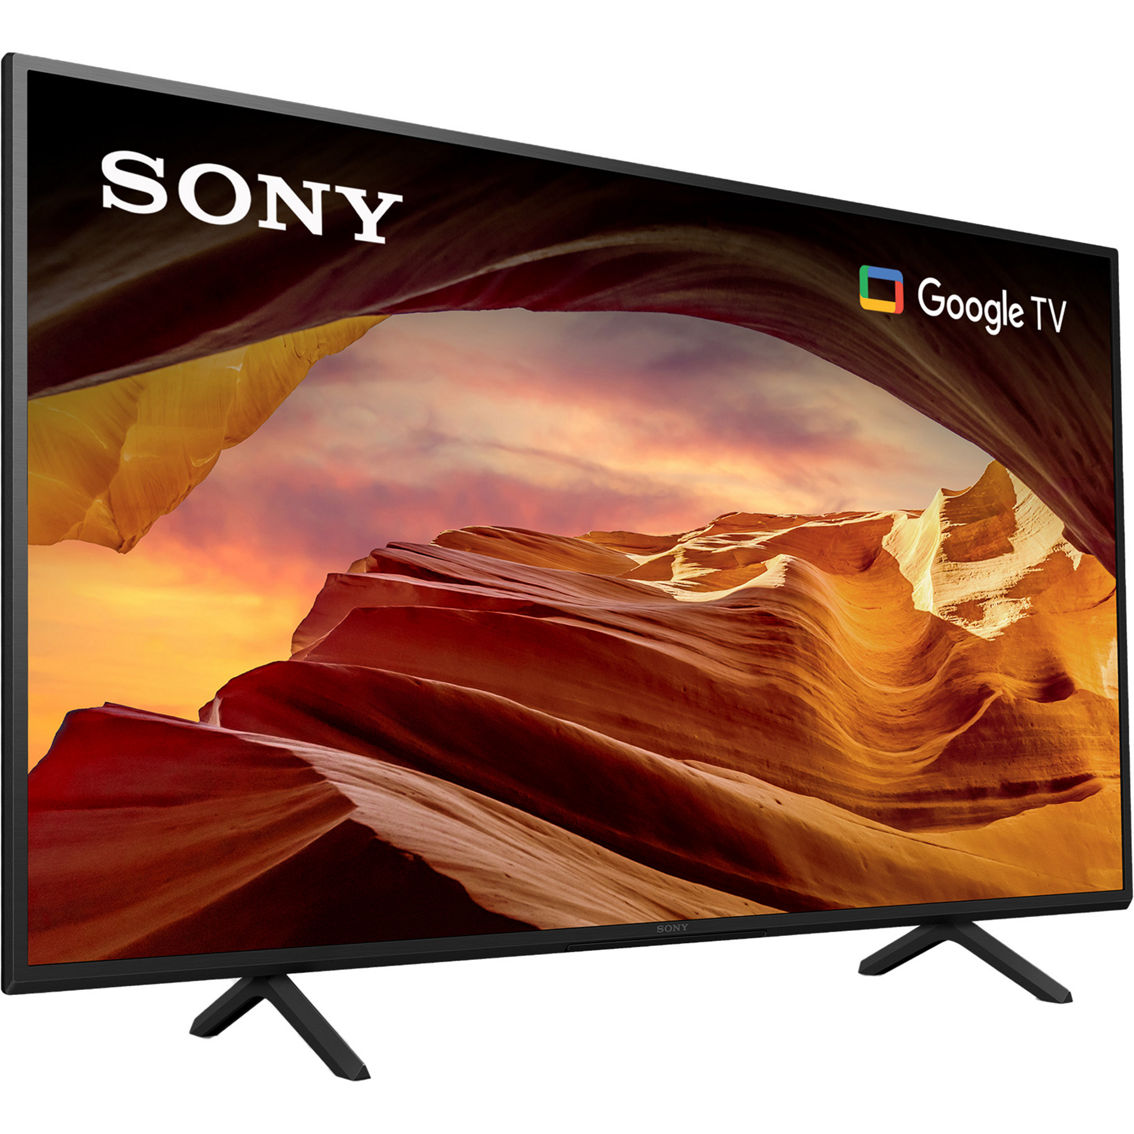 Sony 50 in. Class X77L 4K HDR LED Google TV KD50X77L - Image 3 of 8